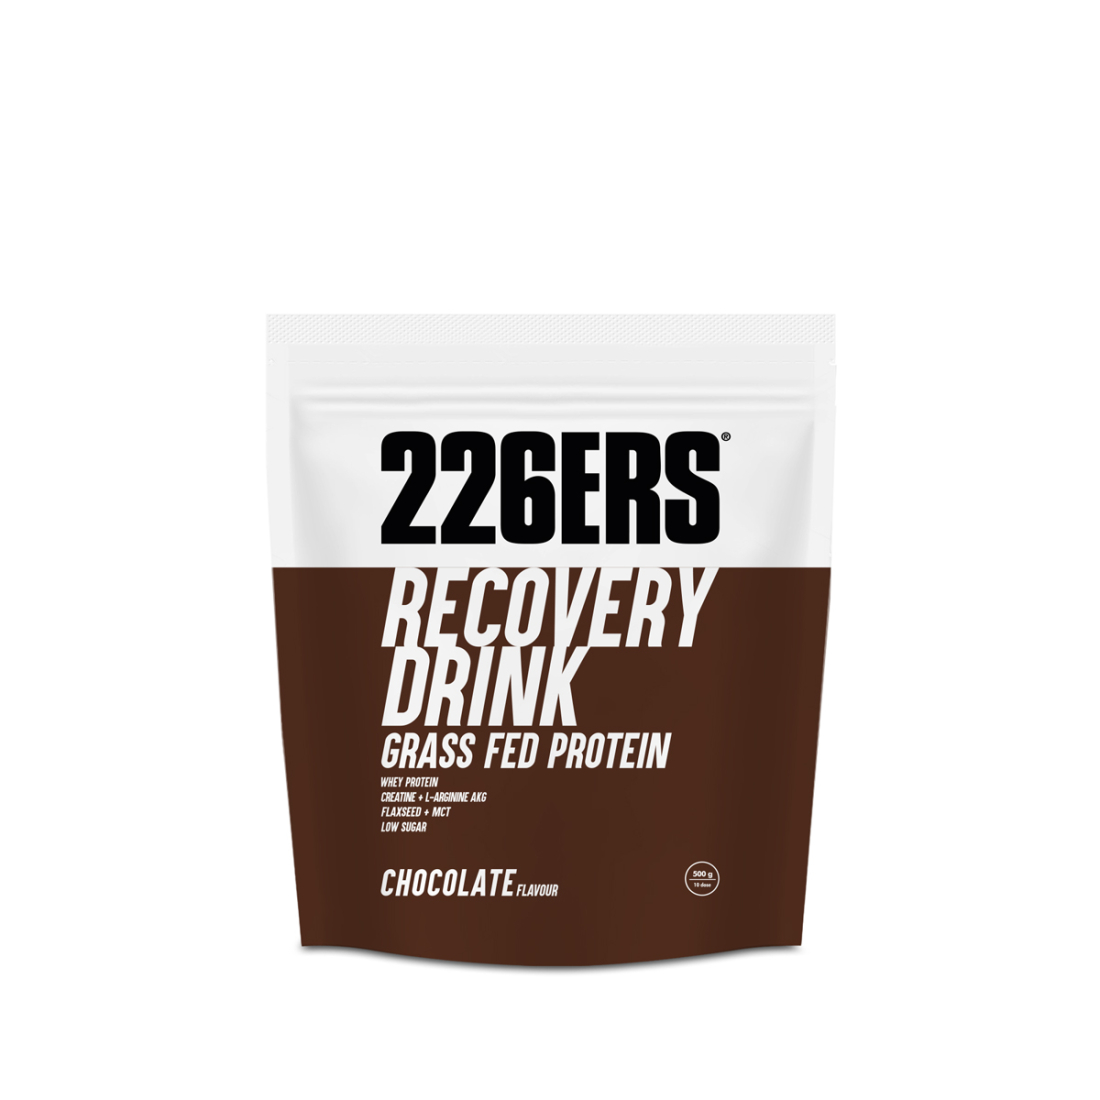 RECOVERY DRINK - Grass Fed Protein -...